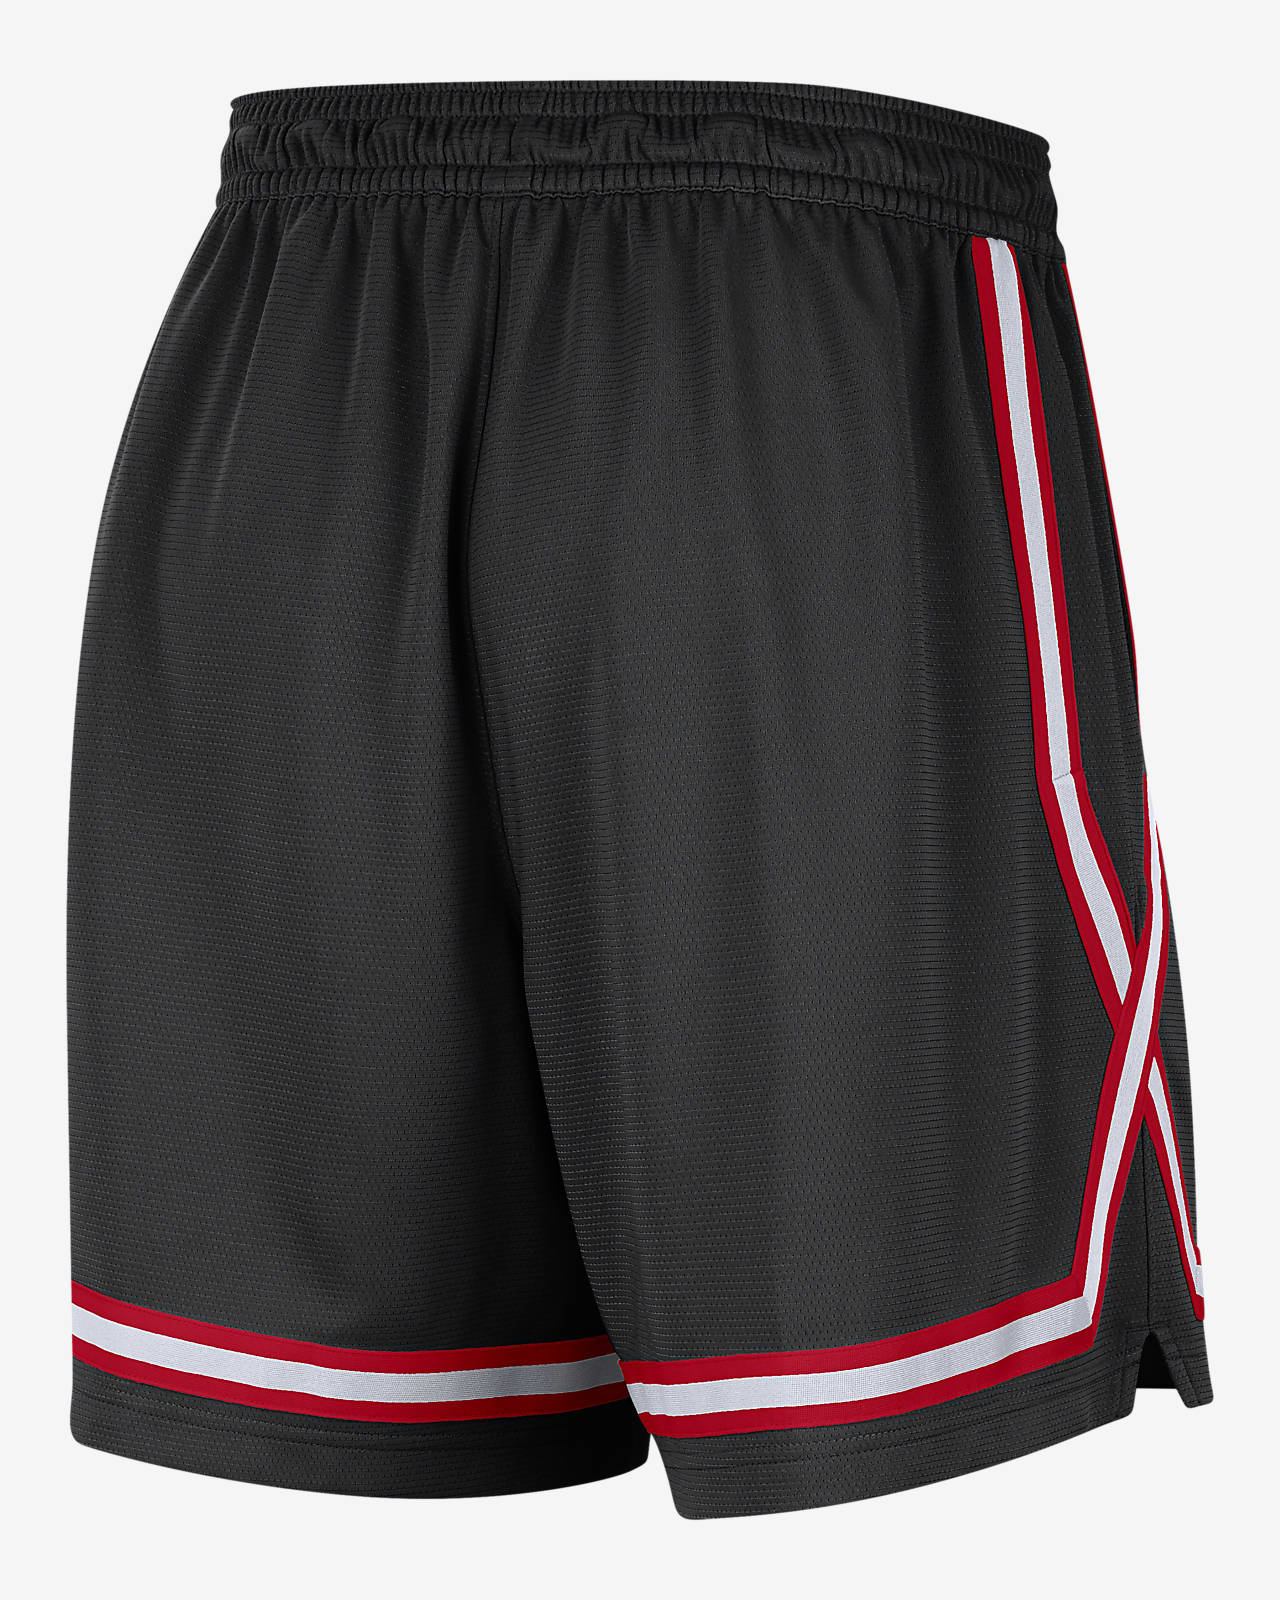 Red Shorts. Nike CA